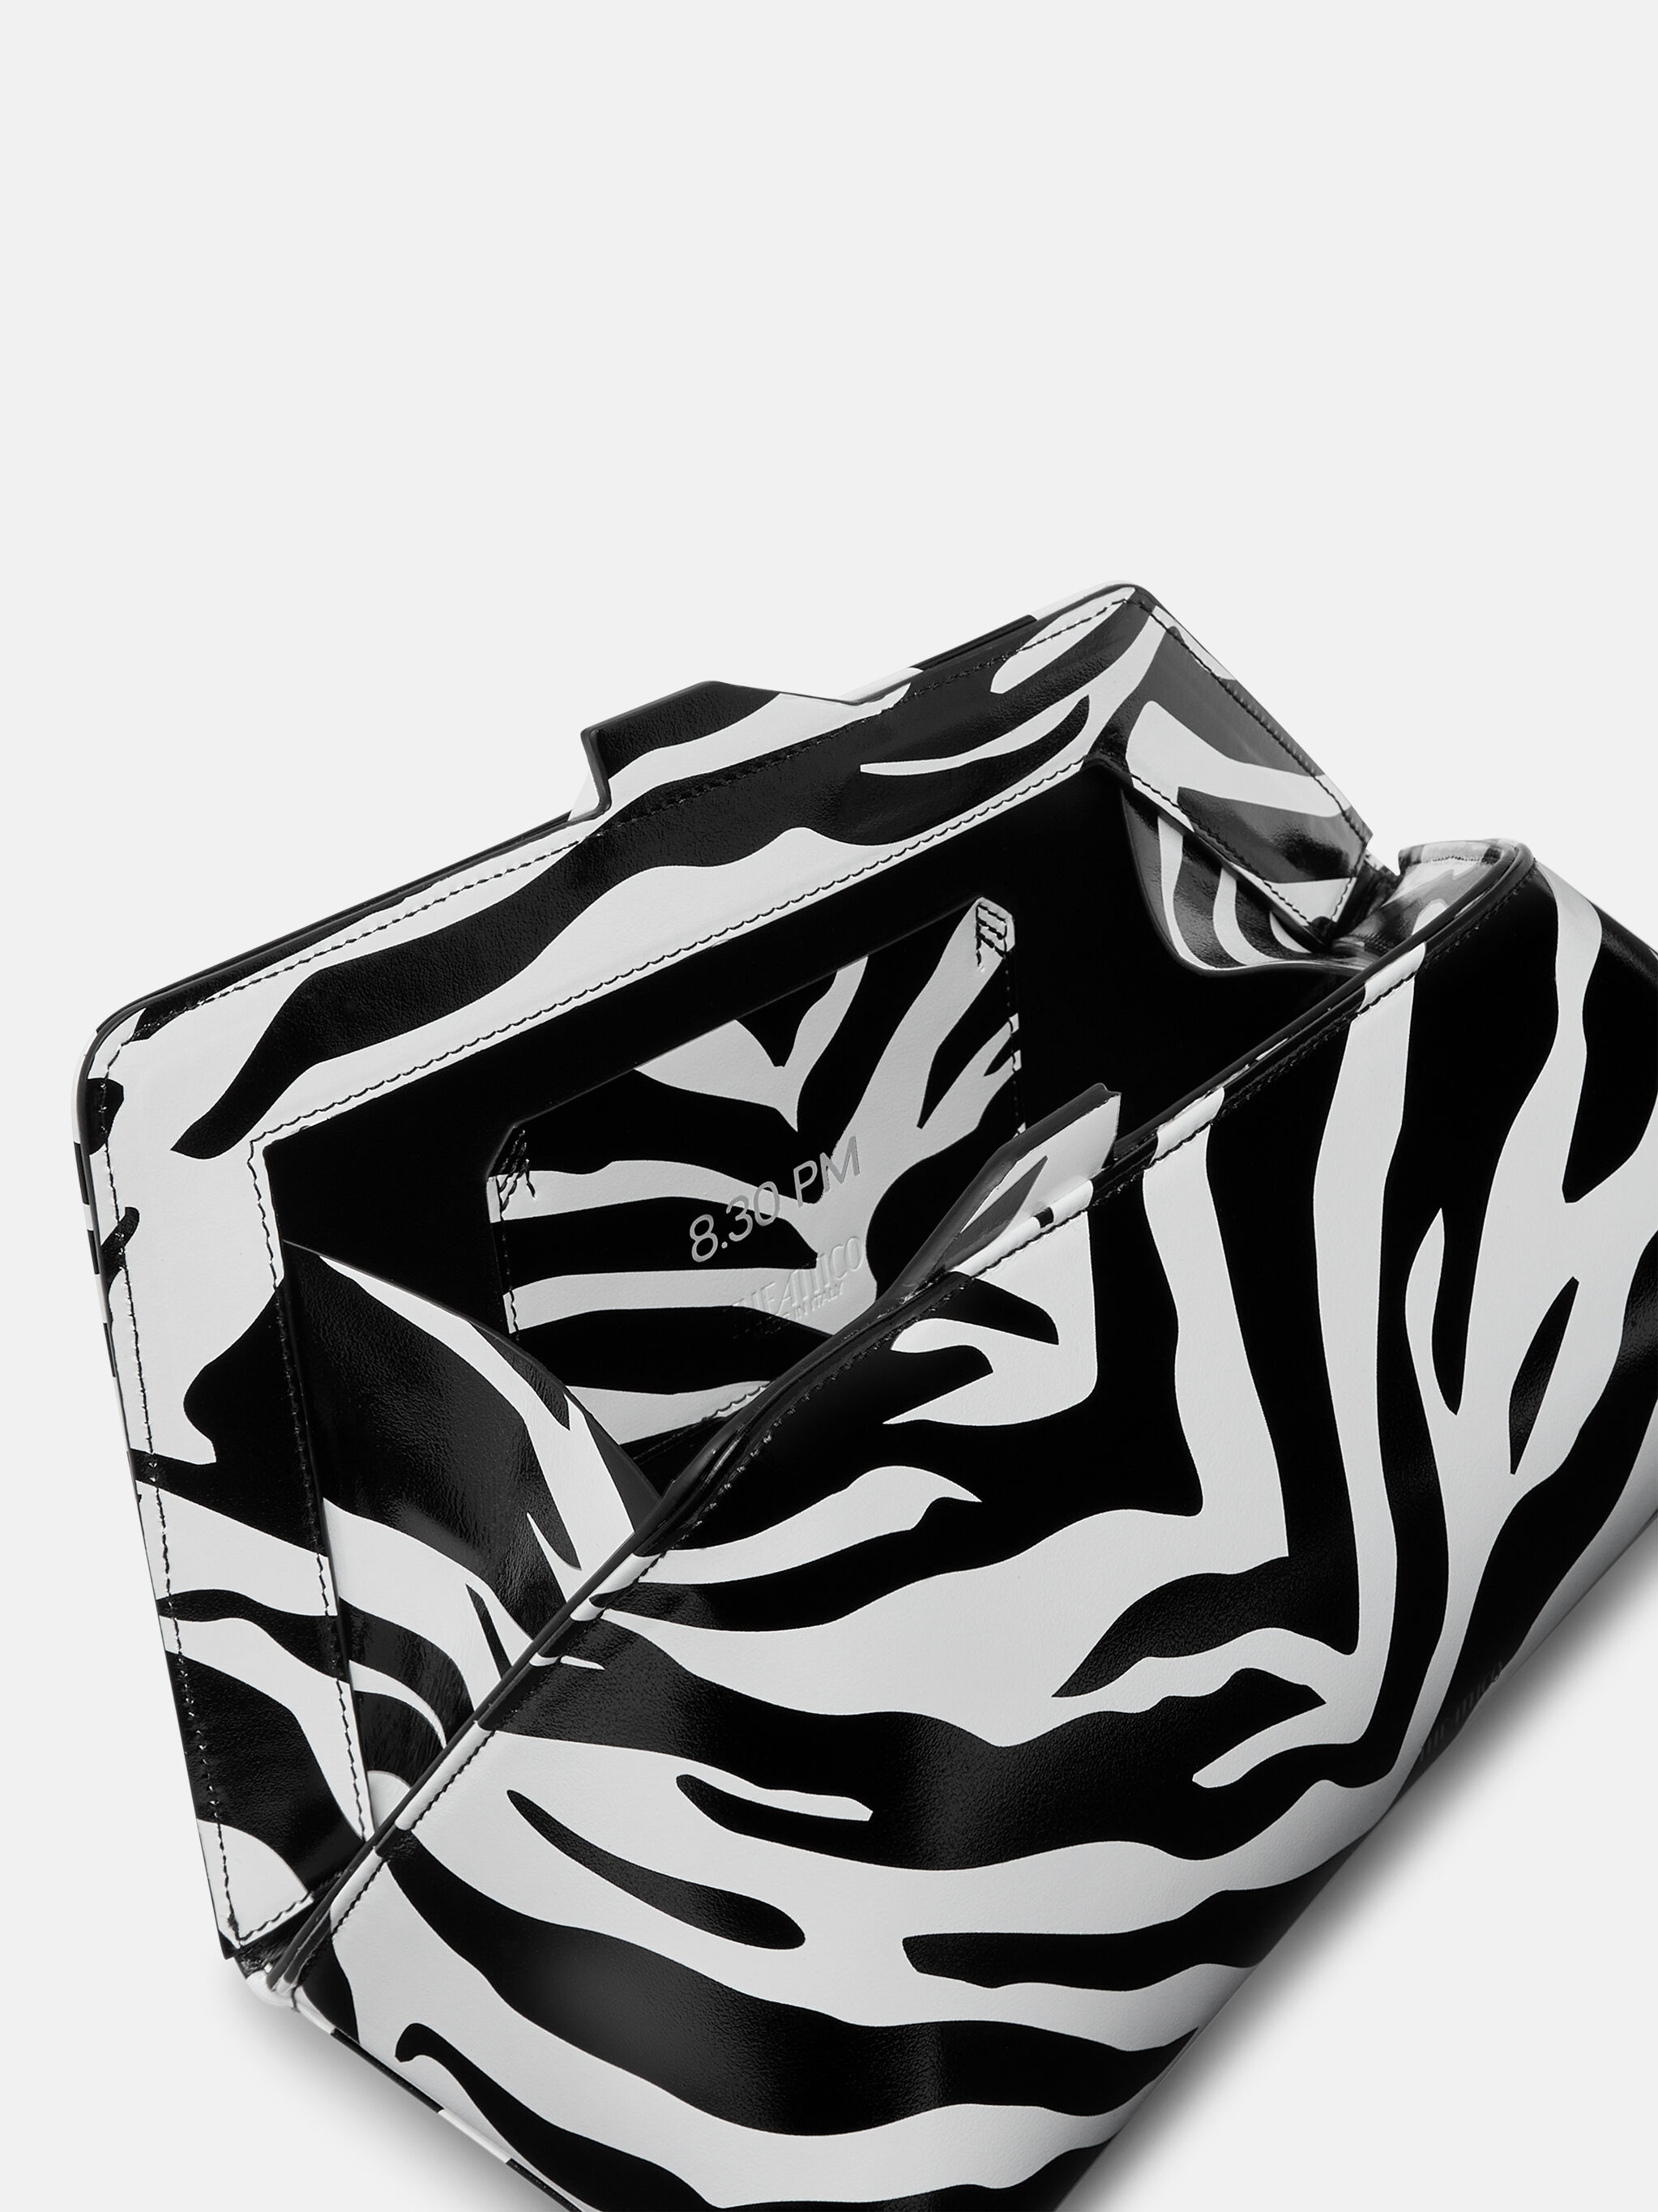 ''8.30PM'' BLACK AND WHITE OVERSIZED CLUTCH - 4